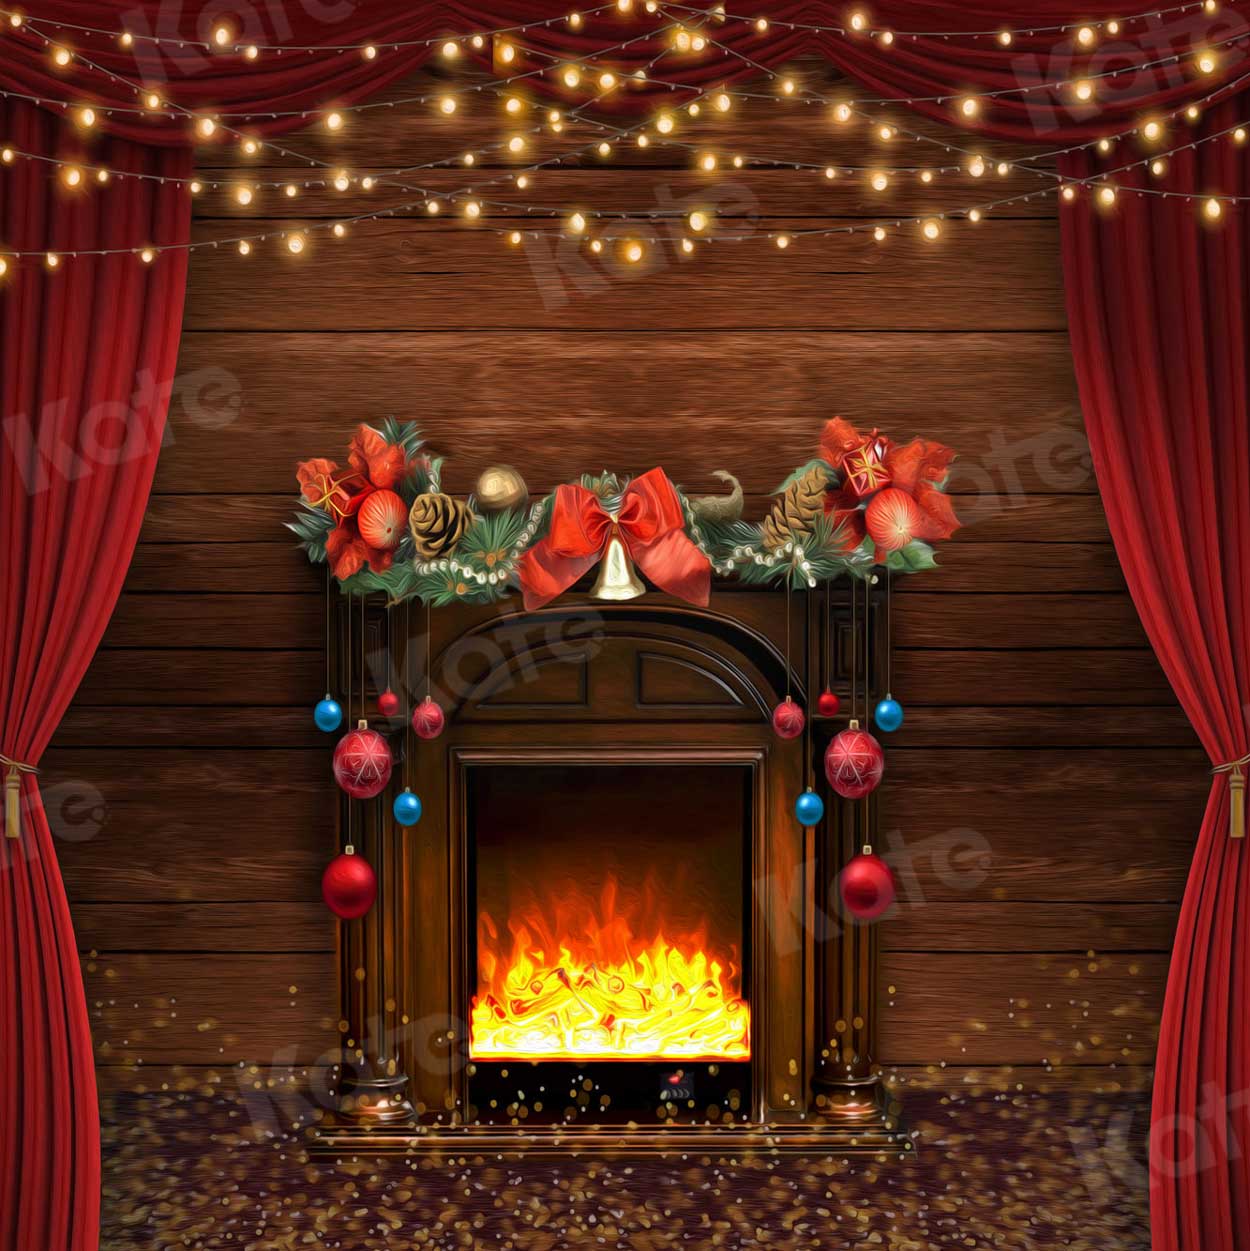 Kate Christmas Fireplace Wooden Backdrop for Photography